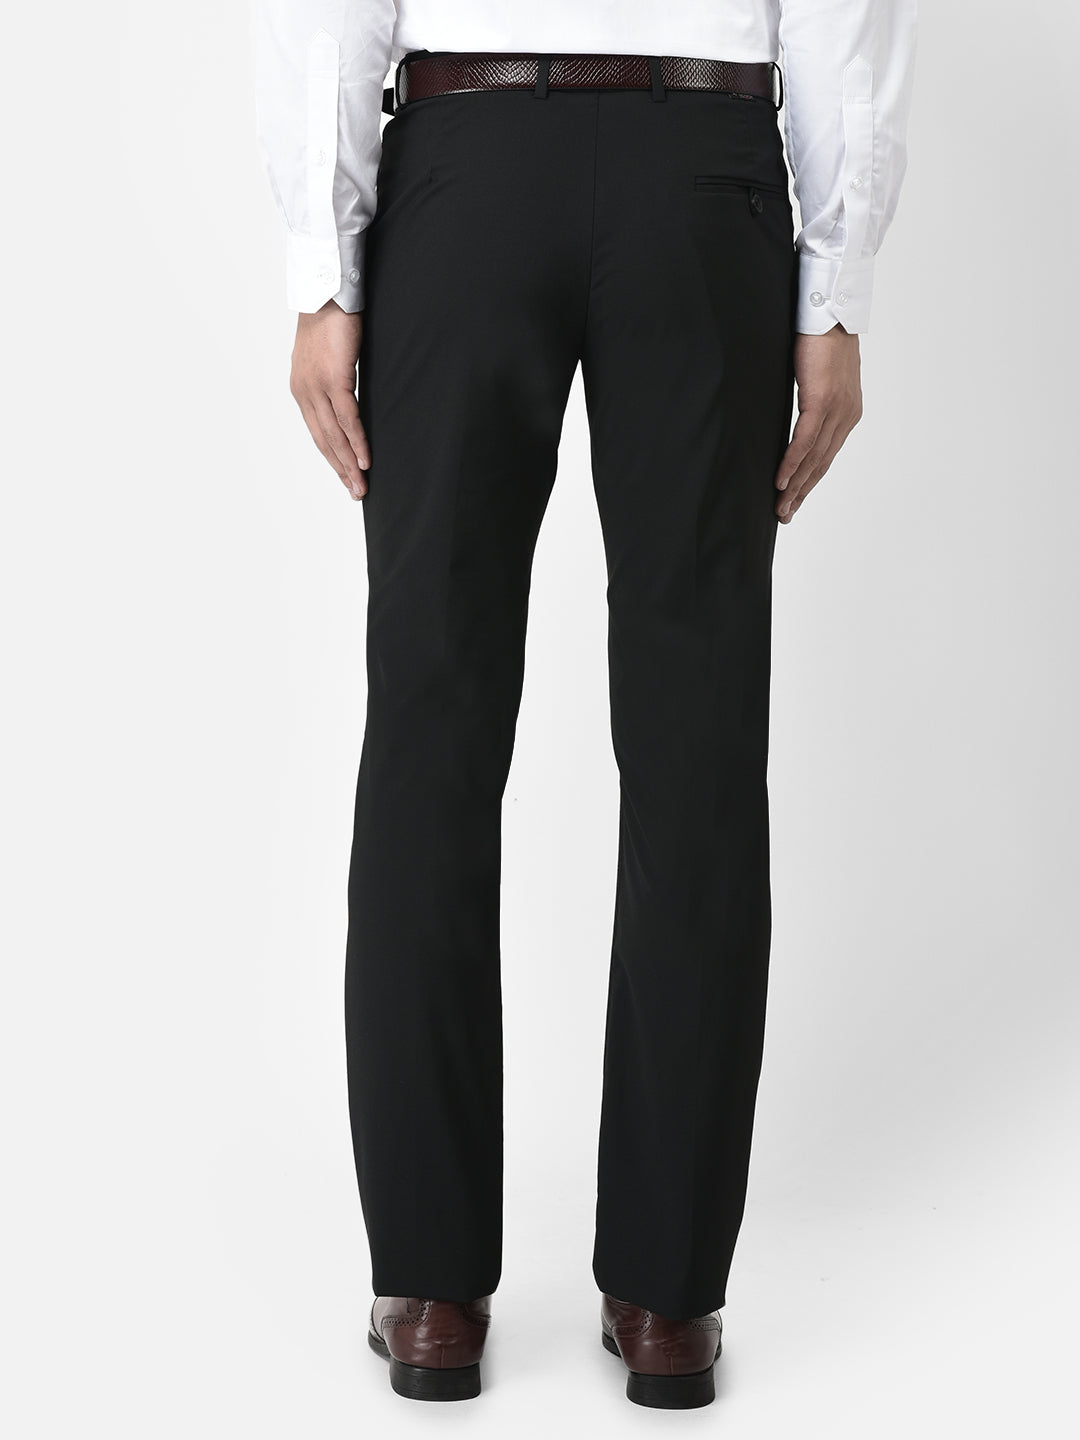 Buy Cliths Men's Black Formal Pants, Slim Fit Formal Trousers  (Black_CL-TR-13A-Black_28) at Amazon.in